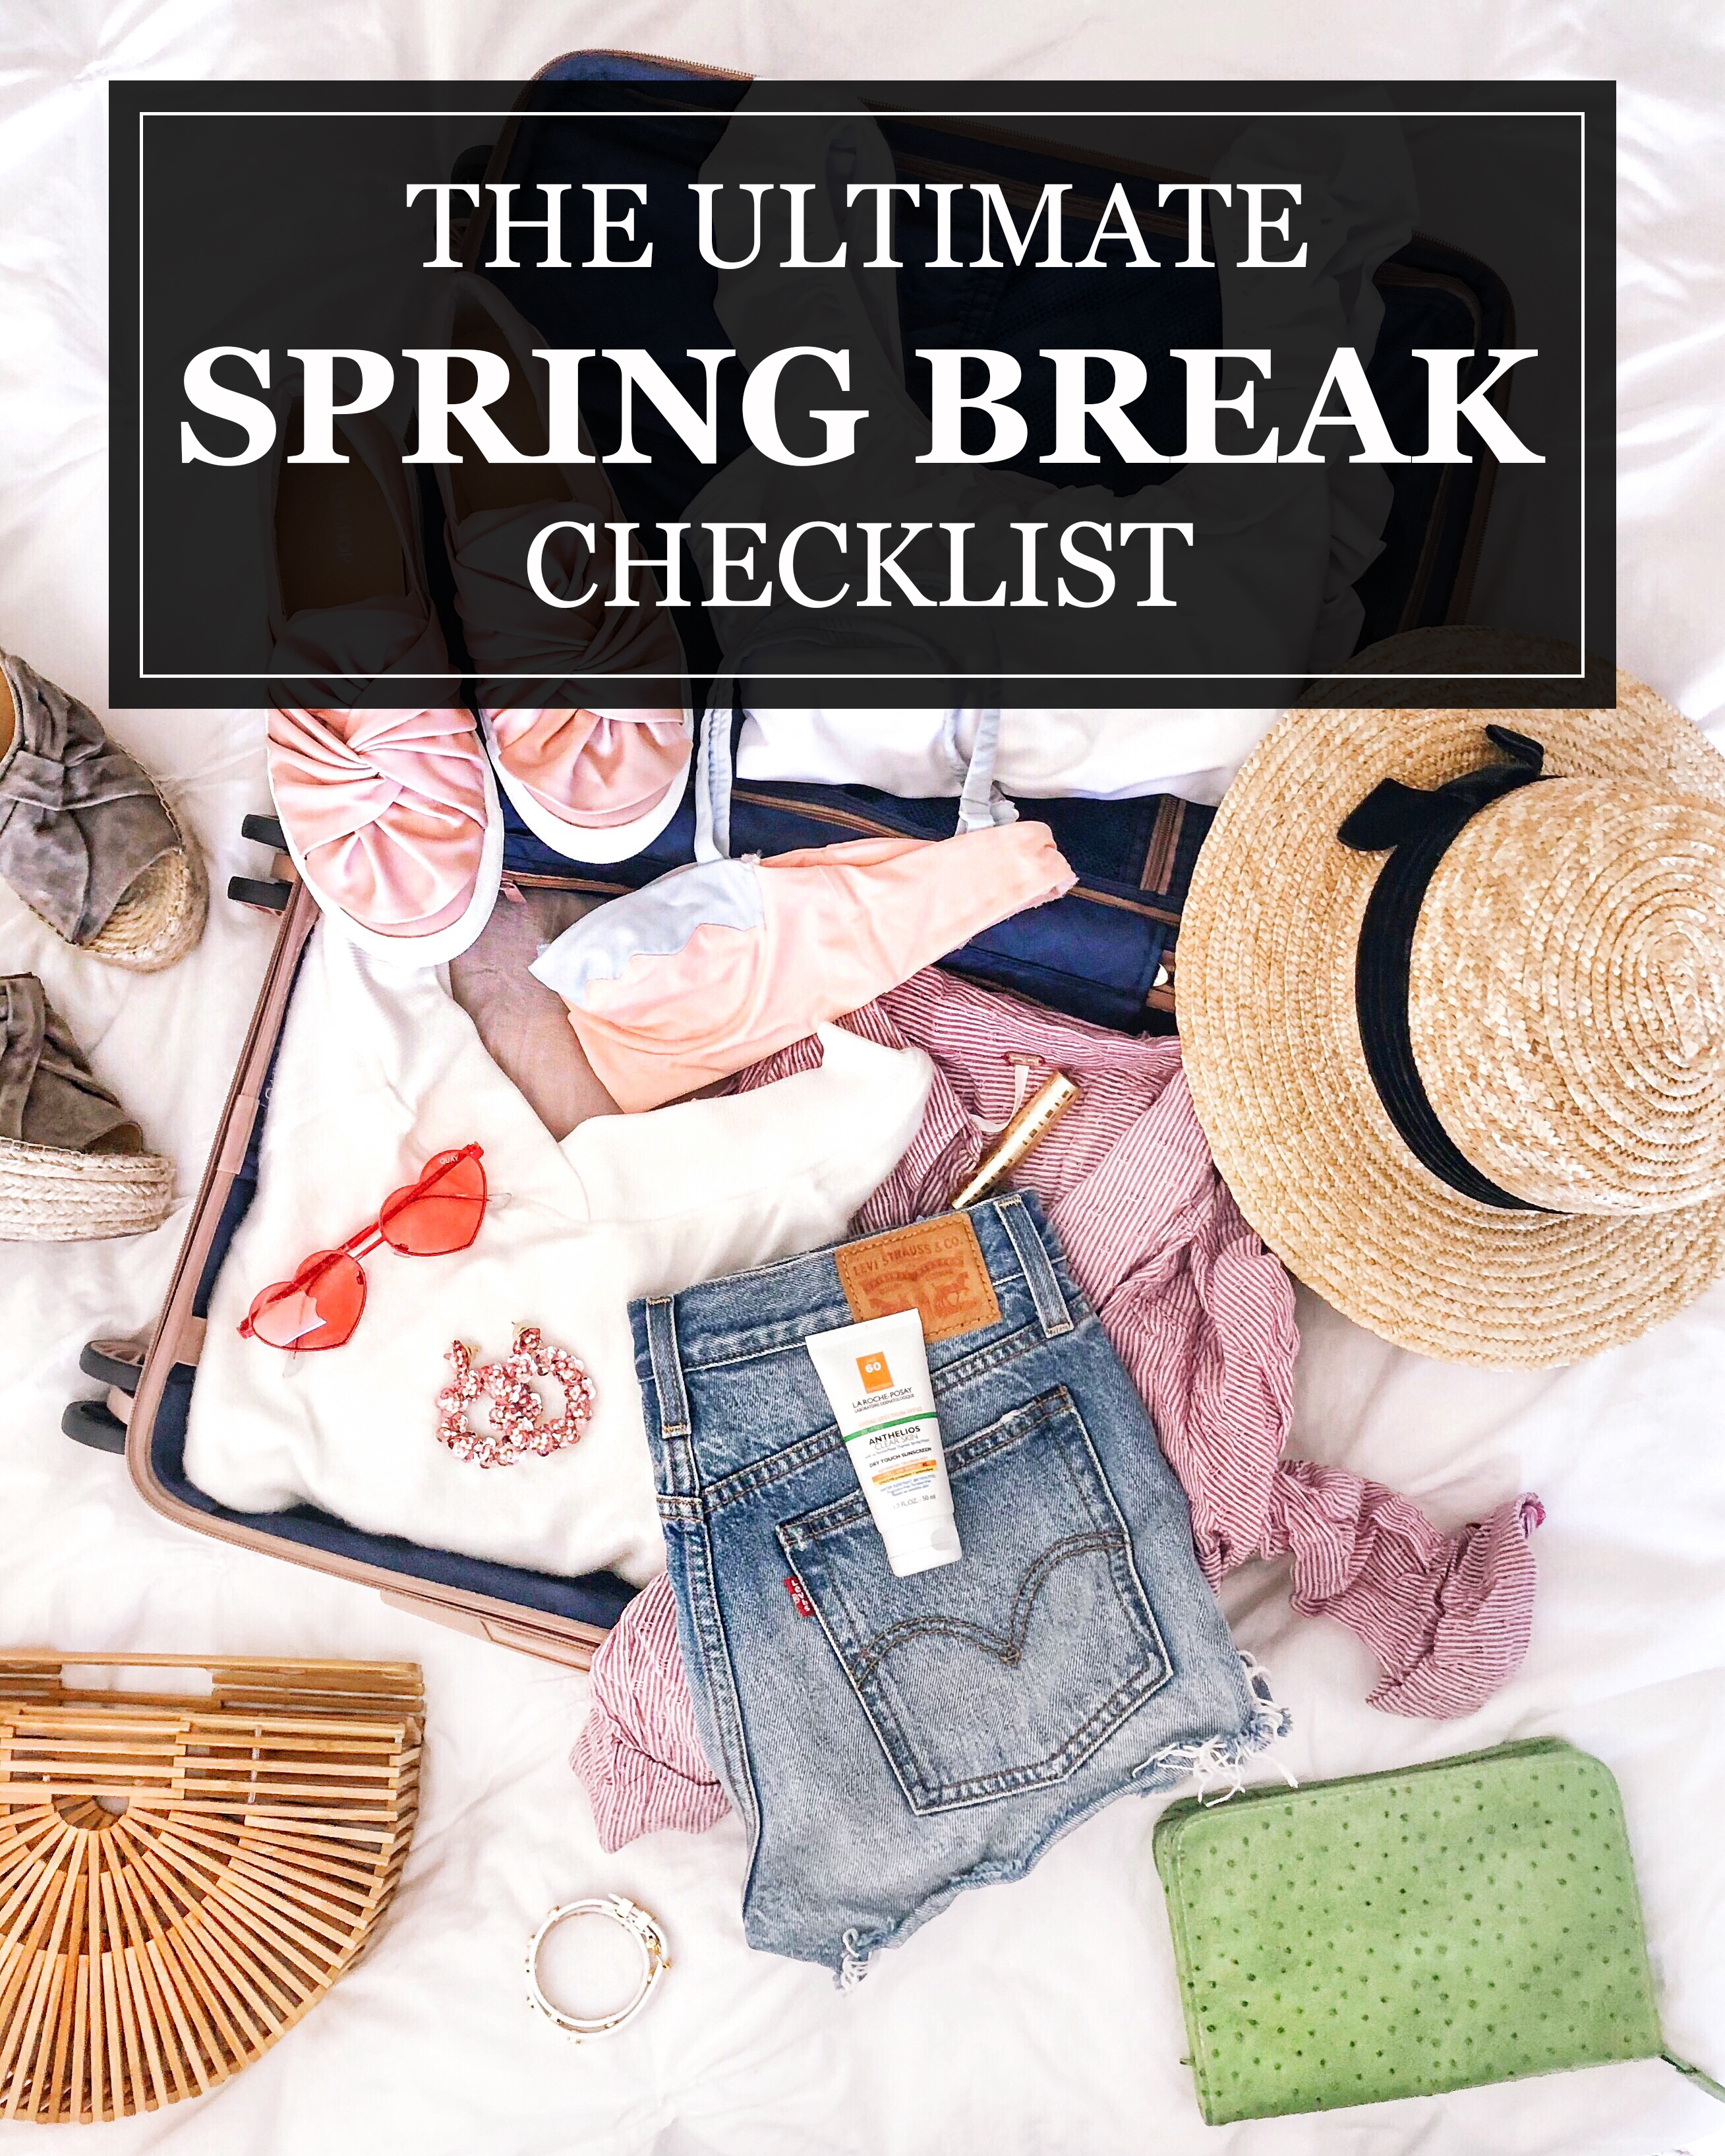 ultimate spring break checklist for packing by popular Chicago travel blogger Visions of Vogue